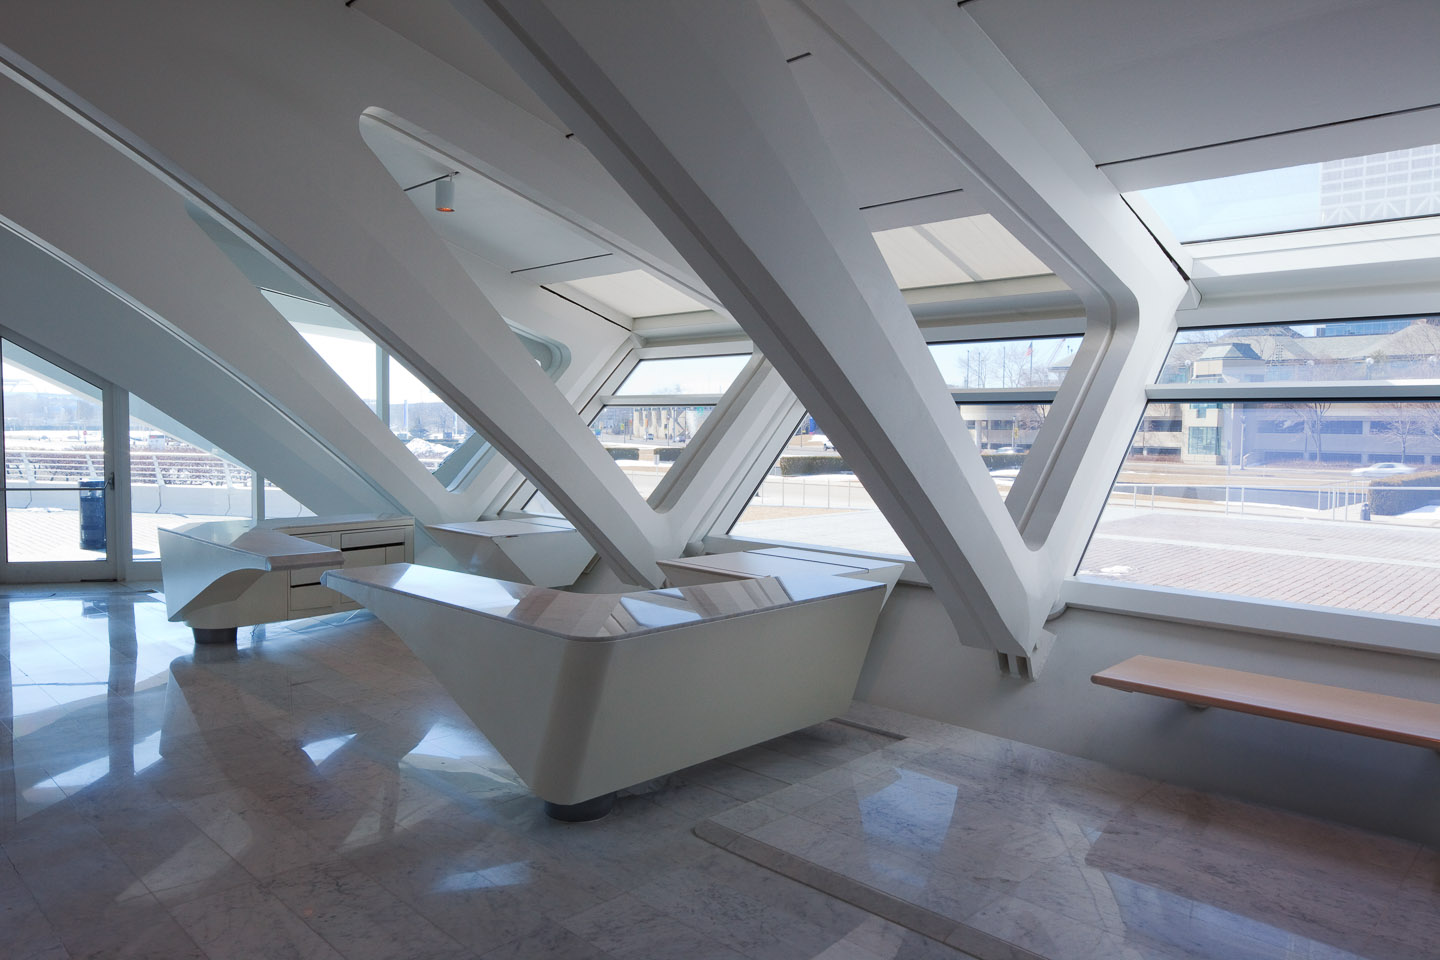 some interior structural bays at the Milwaukee Art Museum, designed by Santiago Calatrava, photographed by Jacob Rosenfeld